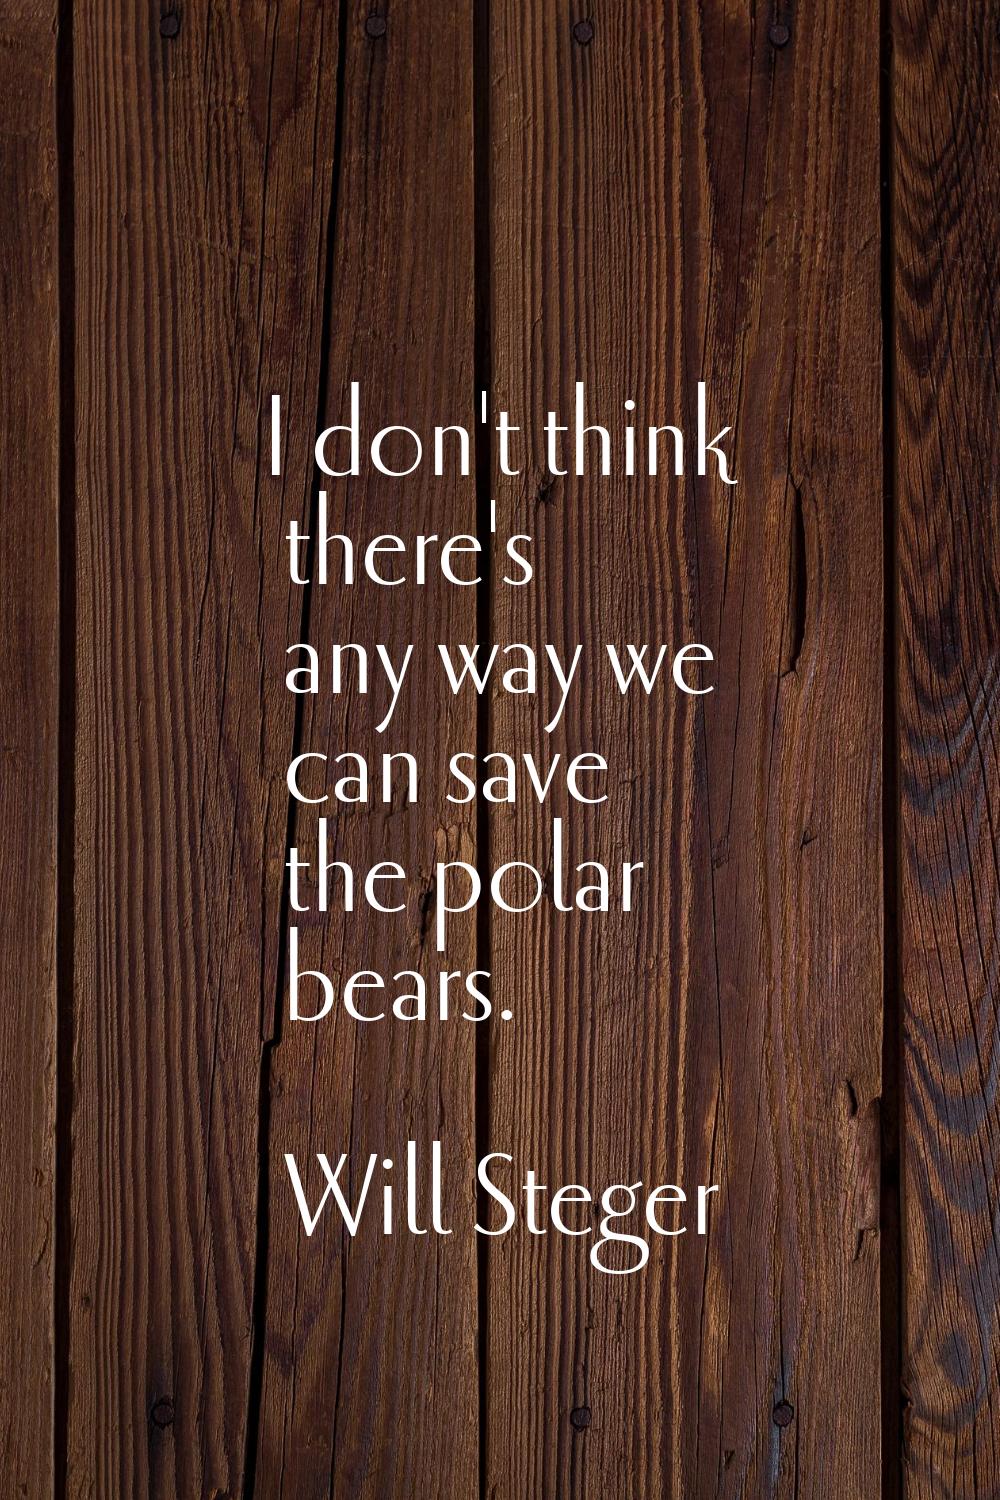 I don't think there's any way we can save the polar bears.